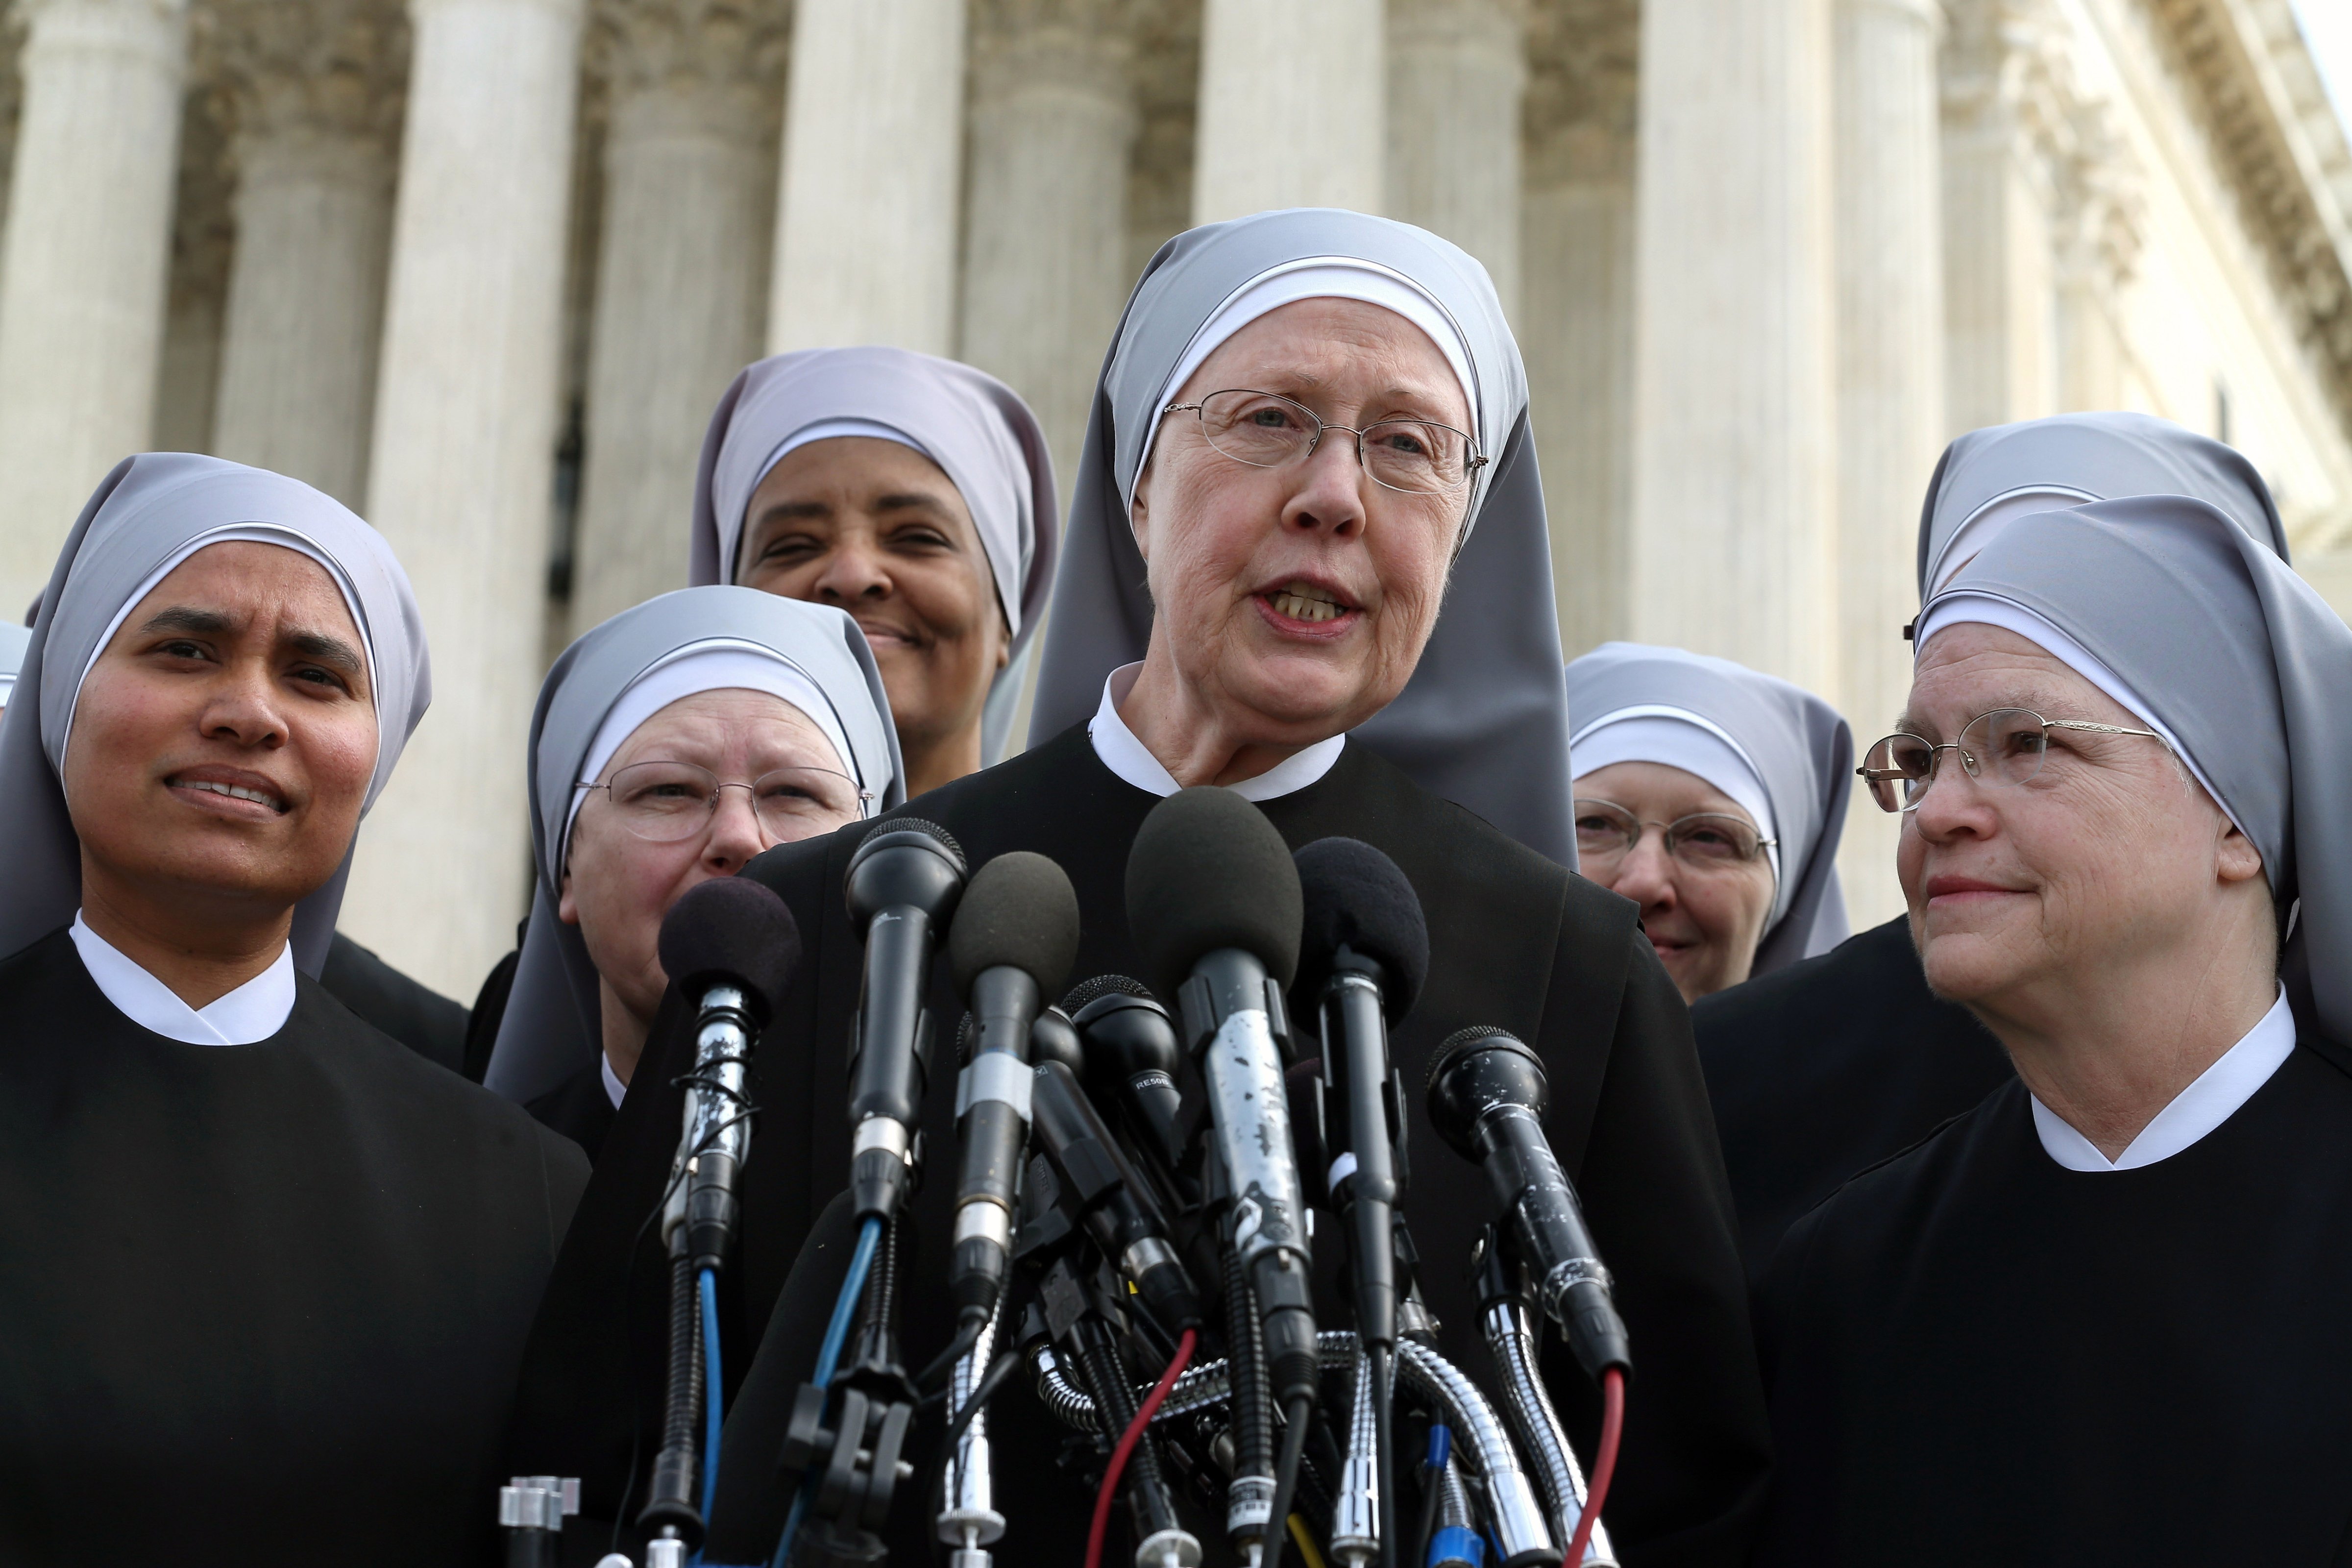 Mother Loraine Marie Maguire, (L), of the Little Sisters of the Poor, speaks to the media after arguments at the U.S. Supreme Court, in Washington, D.C., on March 23, 2016. (Mark Wilson—Getty Images)